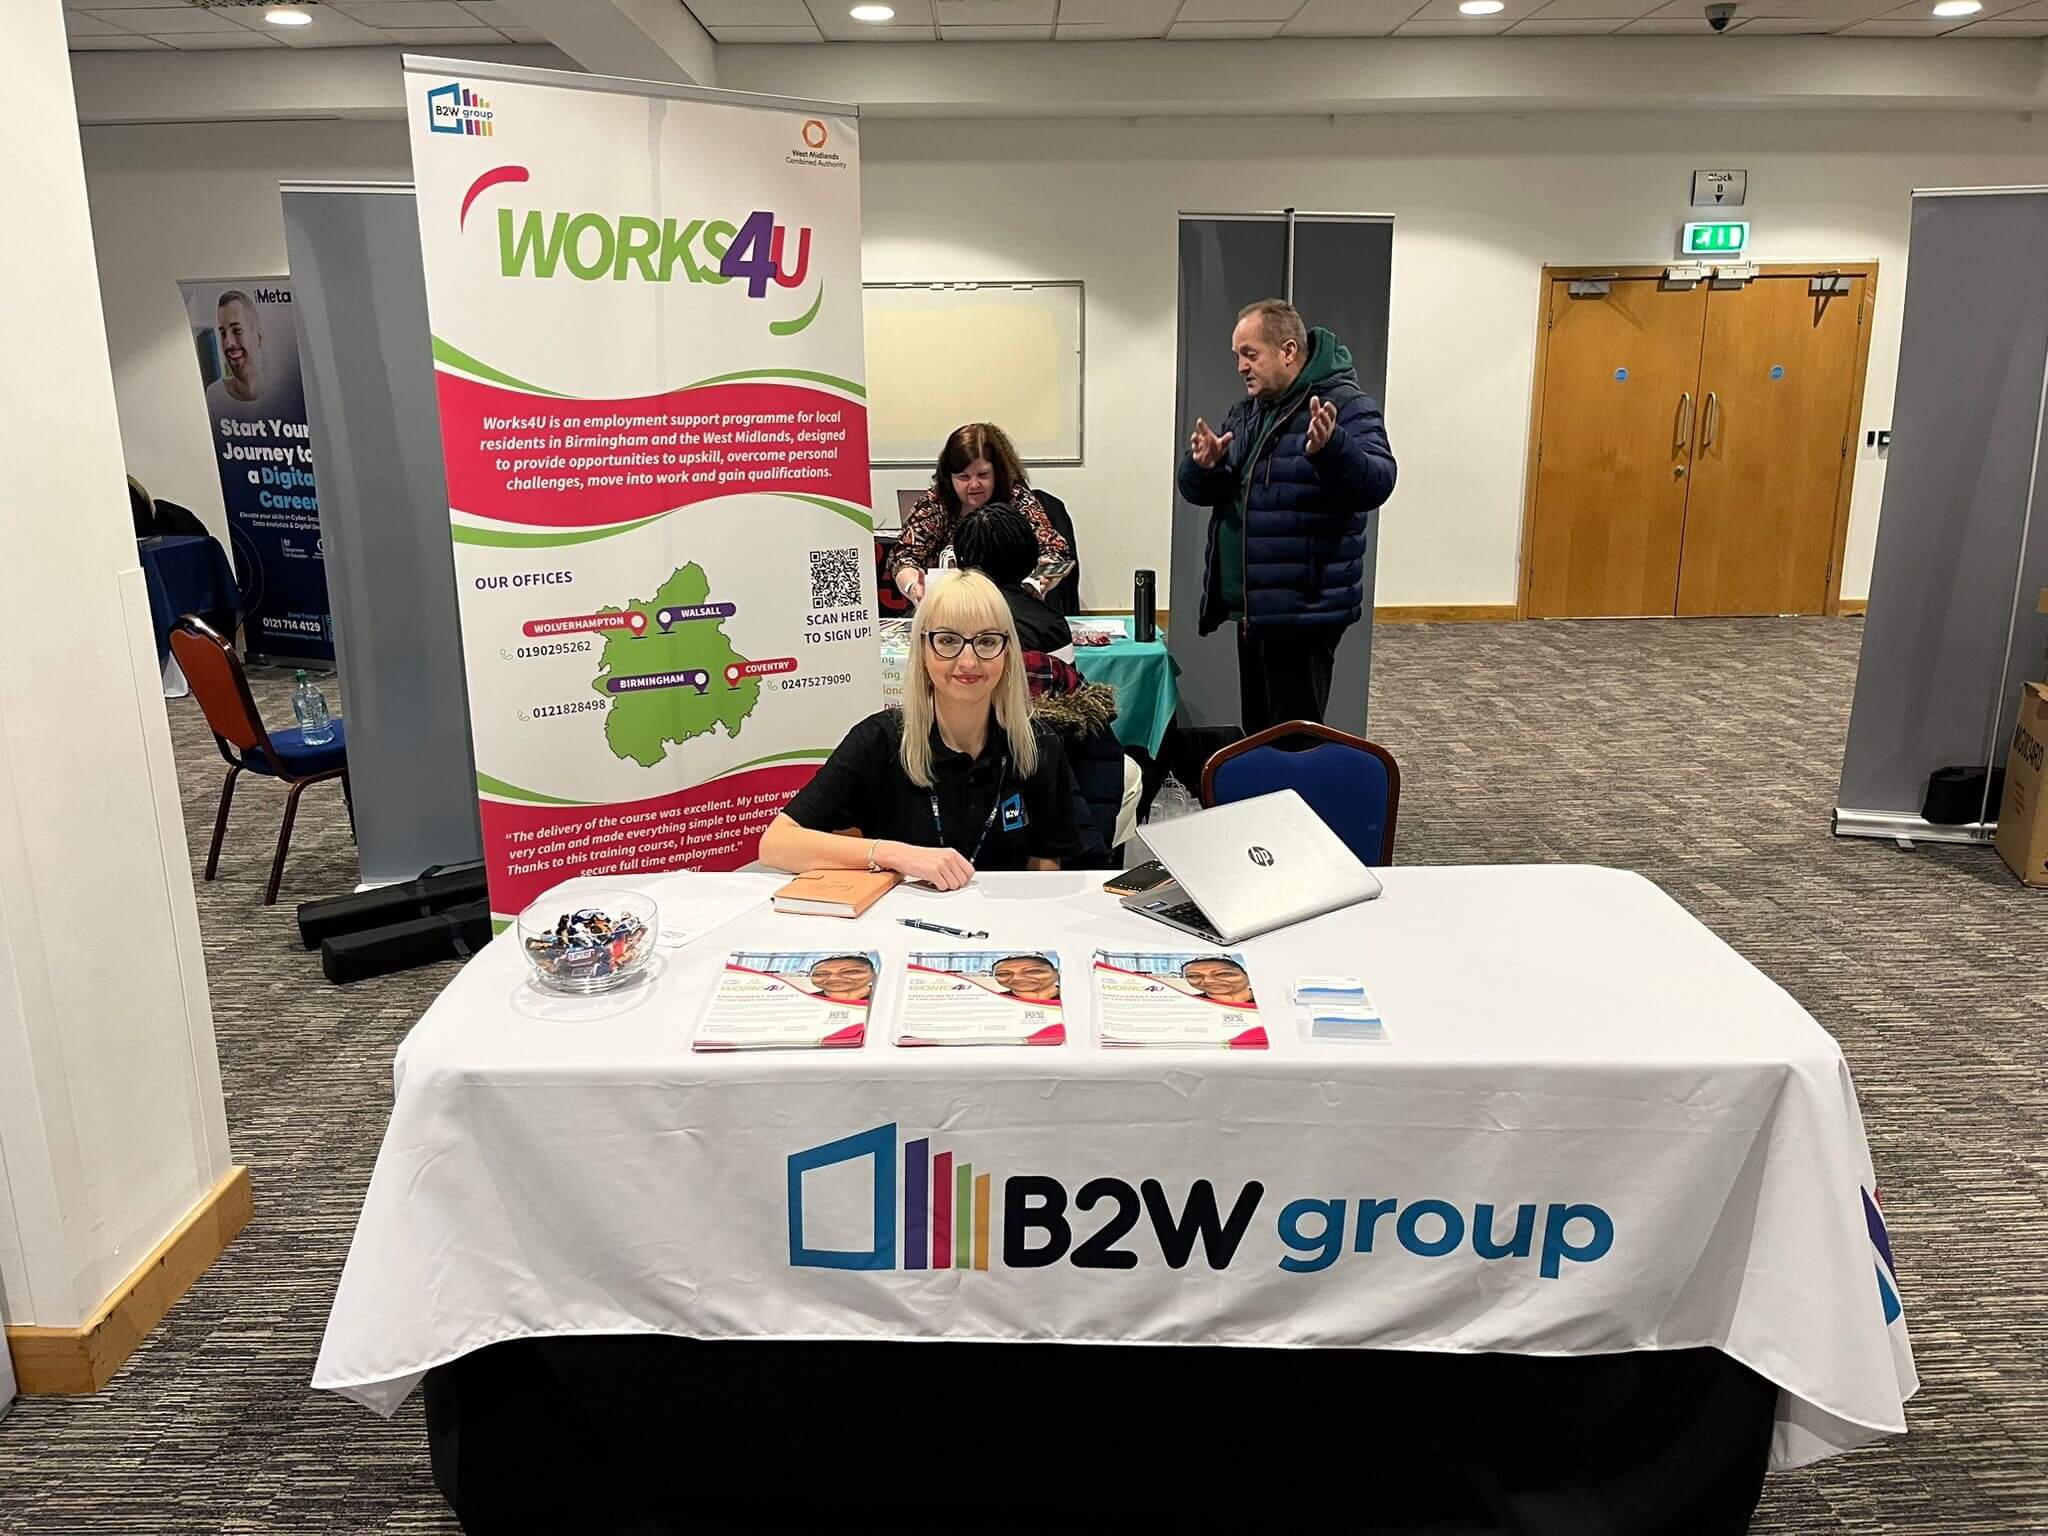 B2W Group at our event in Coventry